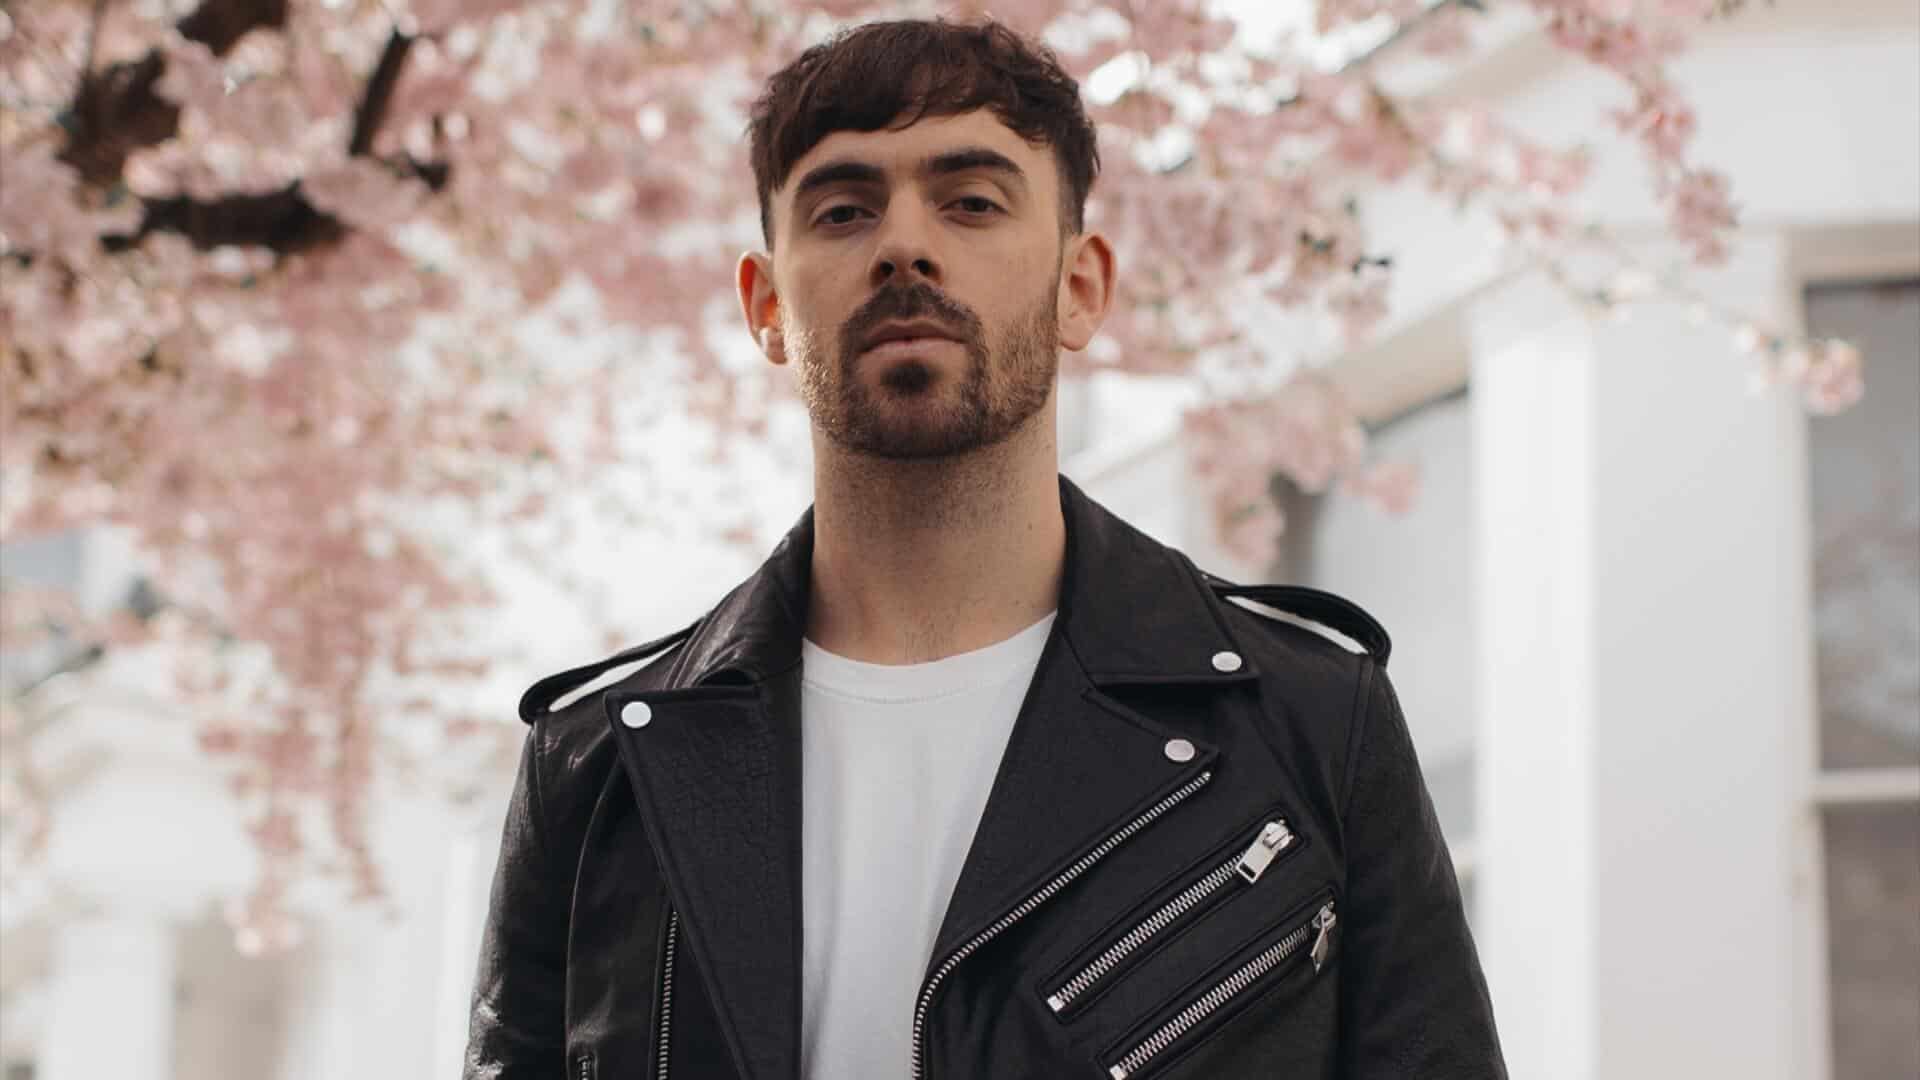 Patrick Topping spreads anthemic vibes in ‘Keep on Moving’: Listen